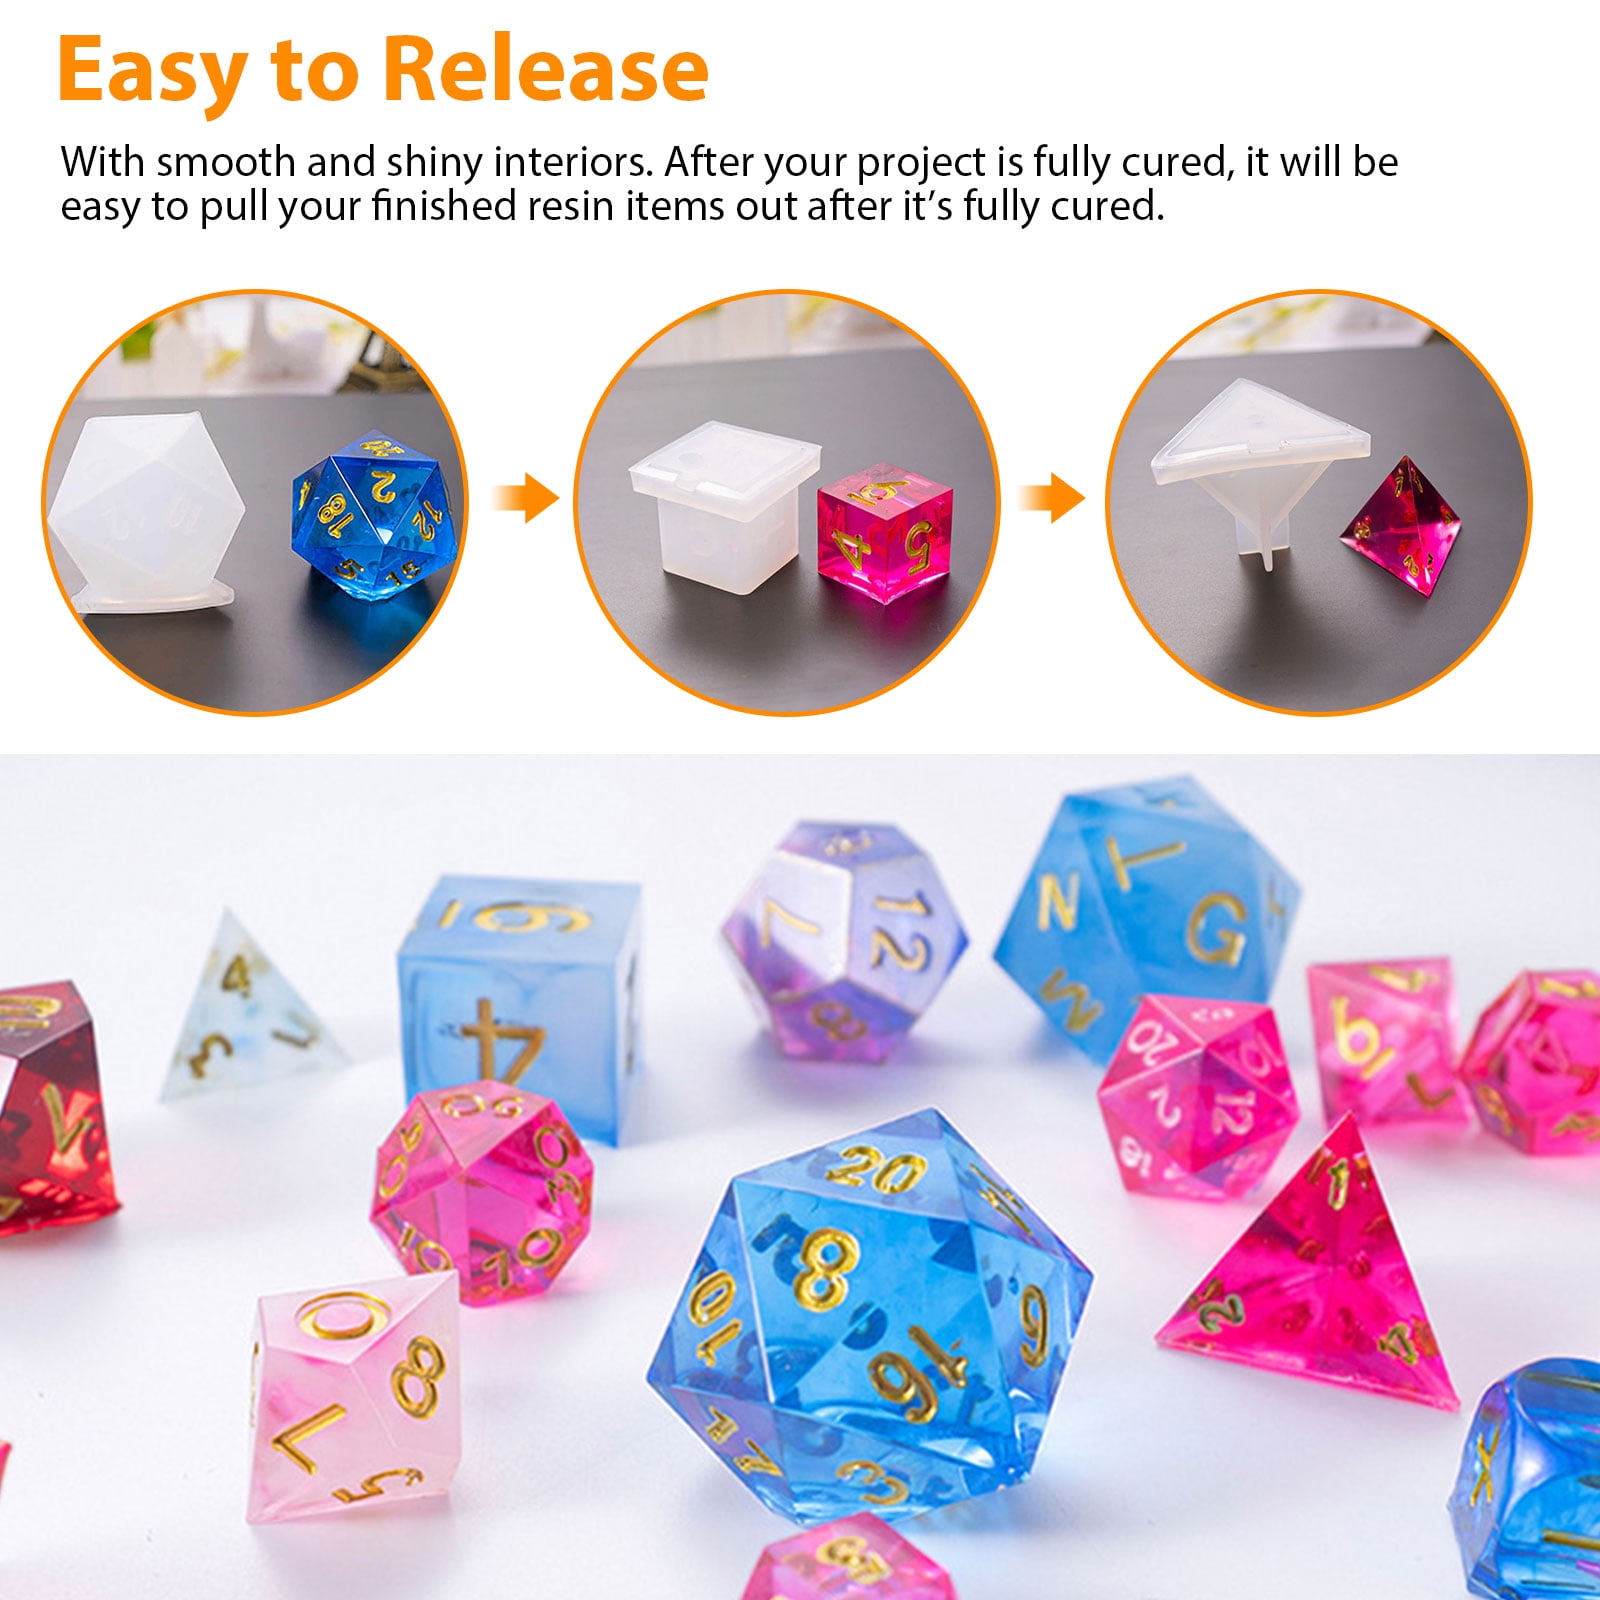 d20 Silicone Mold | Icosahedron Die Mold | Polyhedral Board Game Dice  Making | UV Resin and Epoxy Resin Mold Supplies (23mm x 25mm)